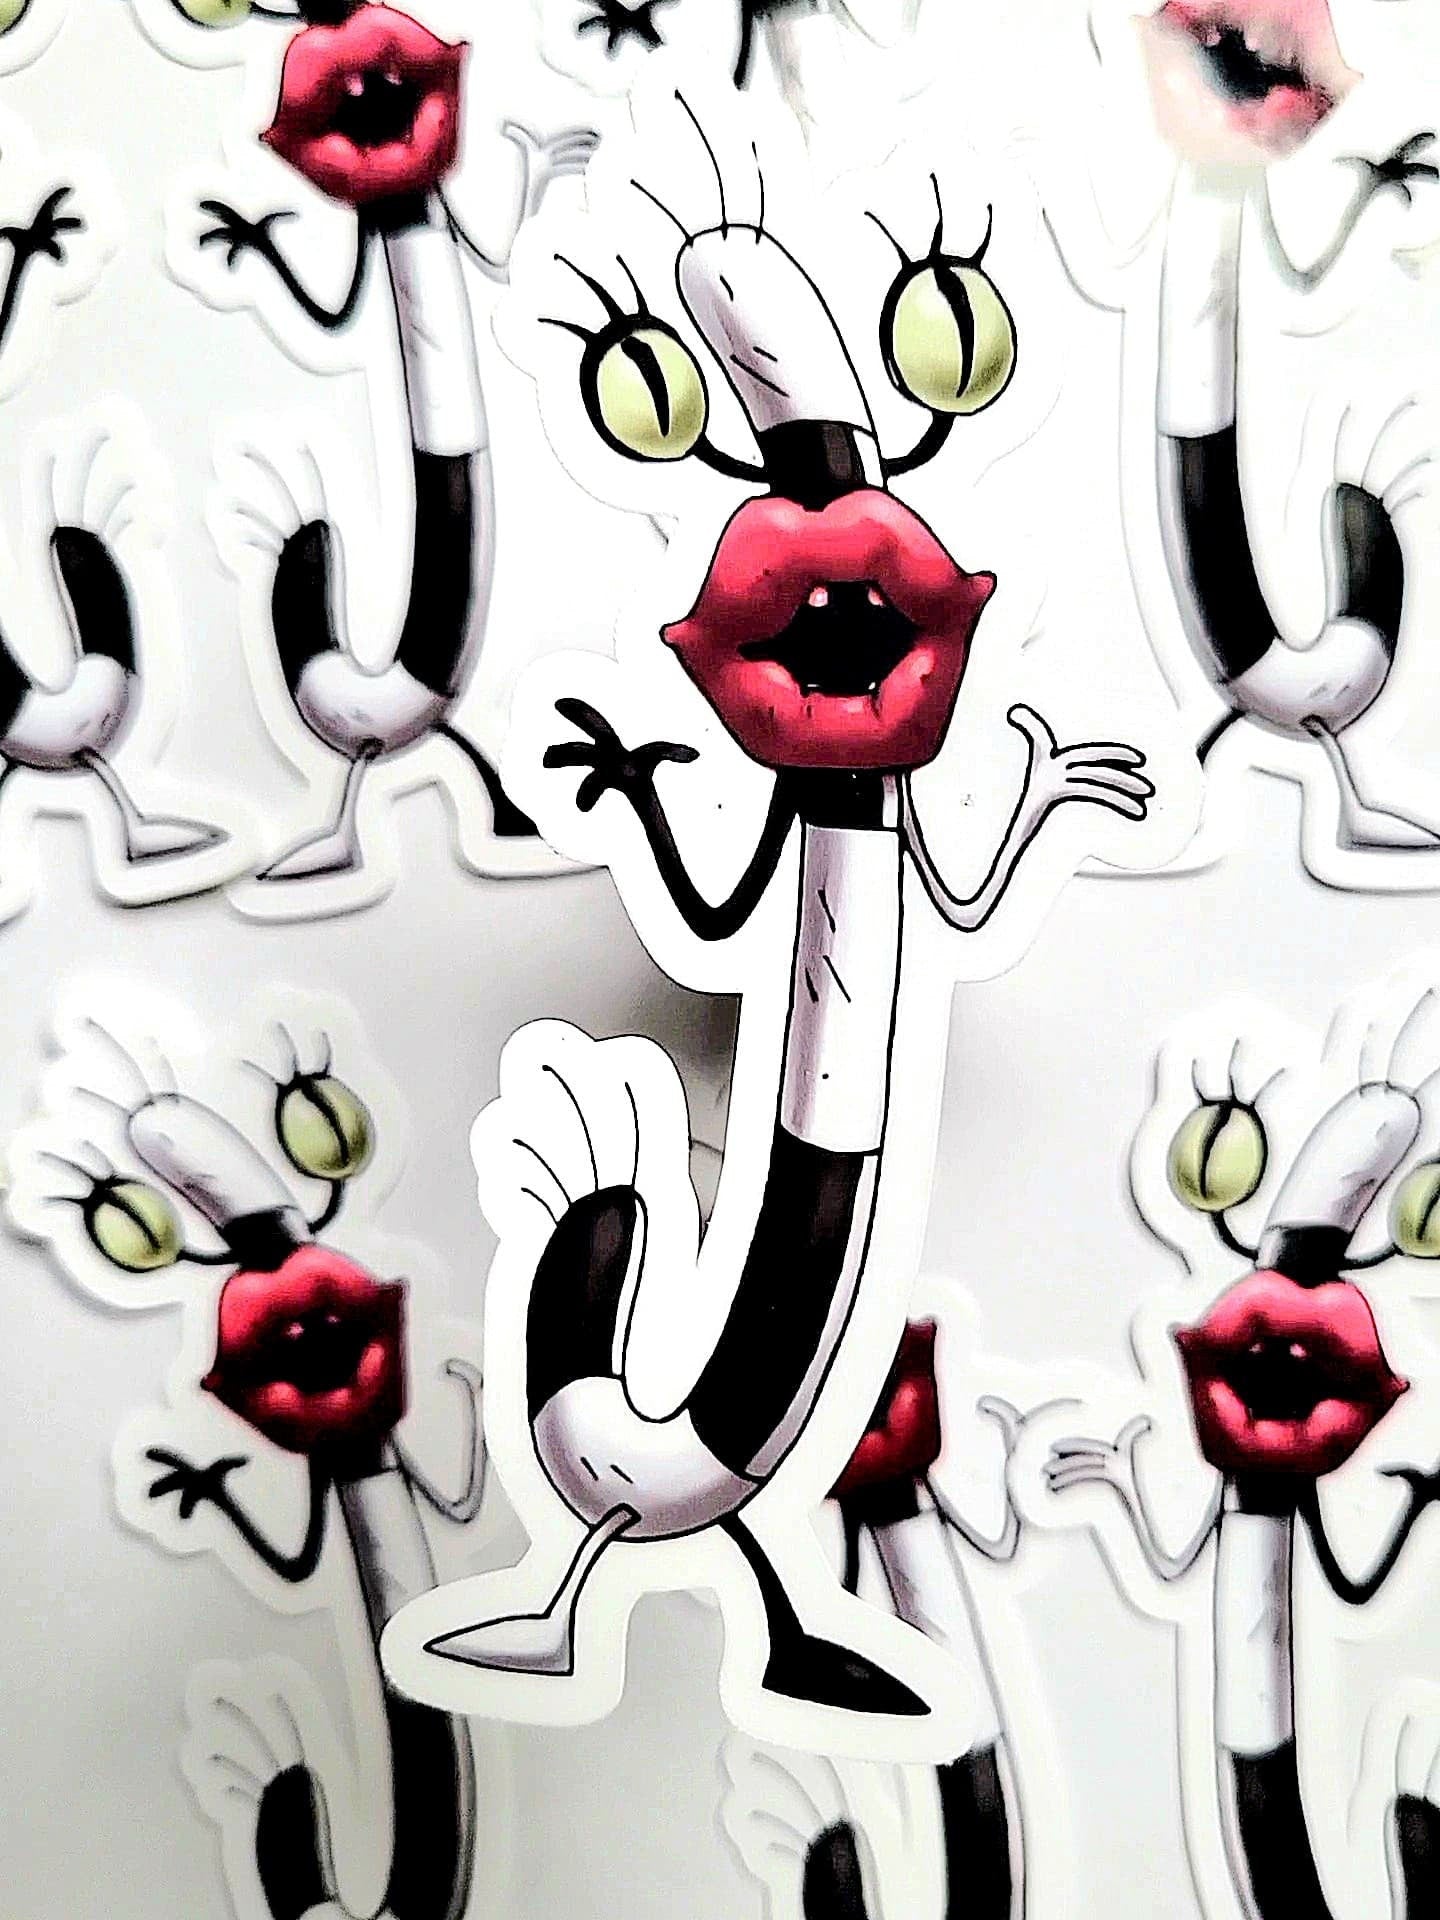 90s Stickers for Sale  90's stickers, Iphone case stickers, Print